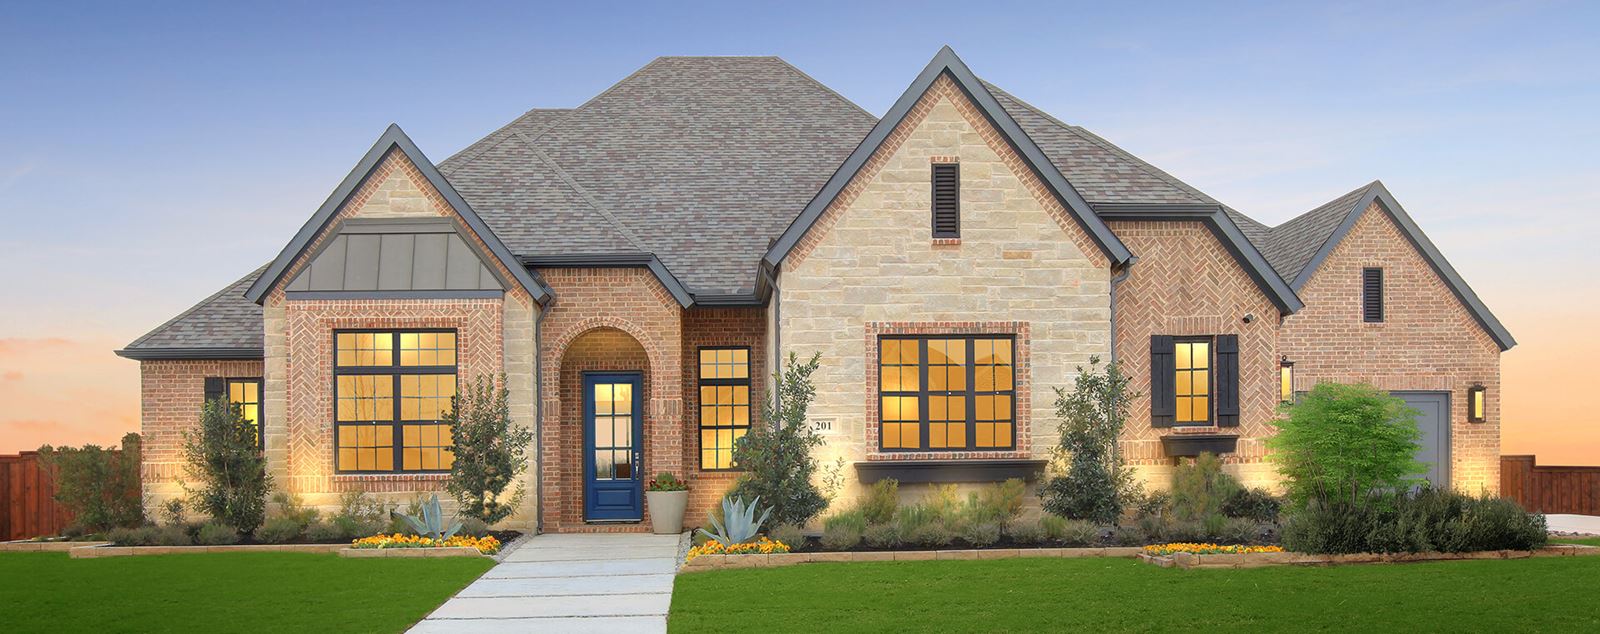 New home exterior in Canyon Falls community | Northlake, Argyle, Flower Mound, TX